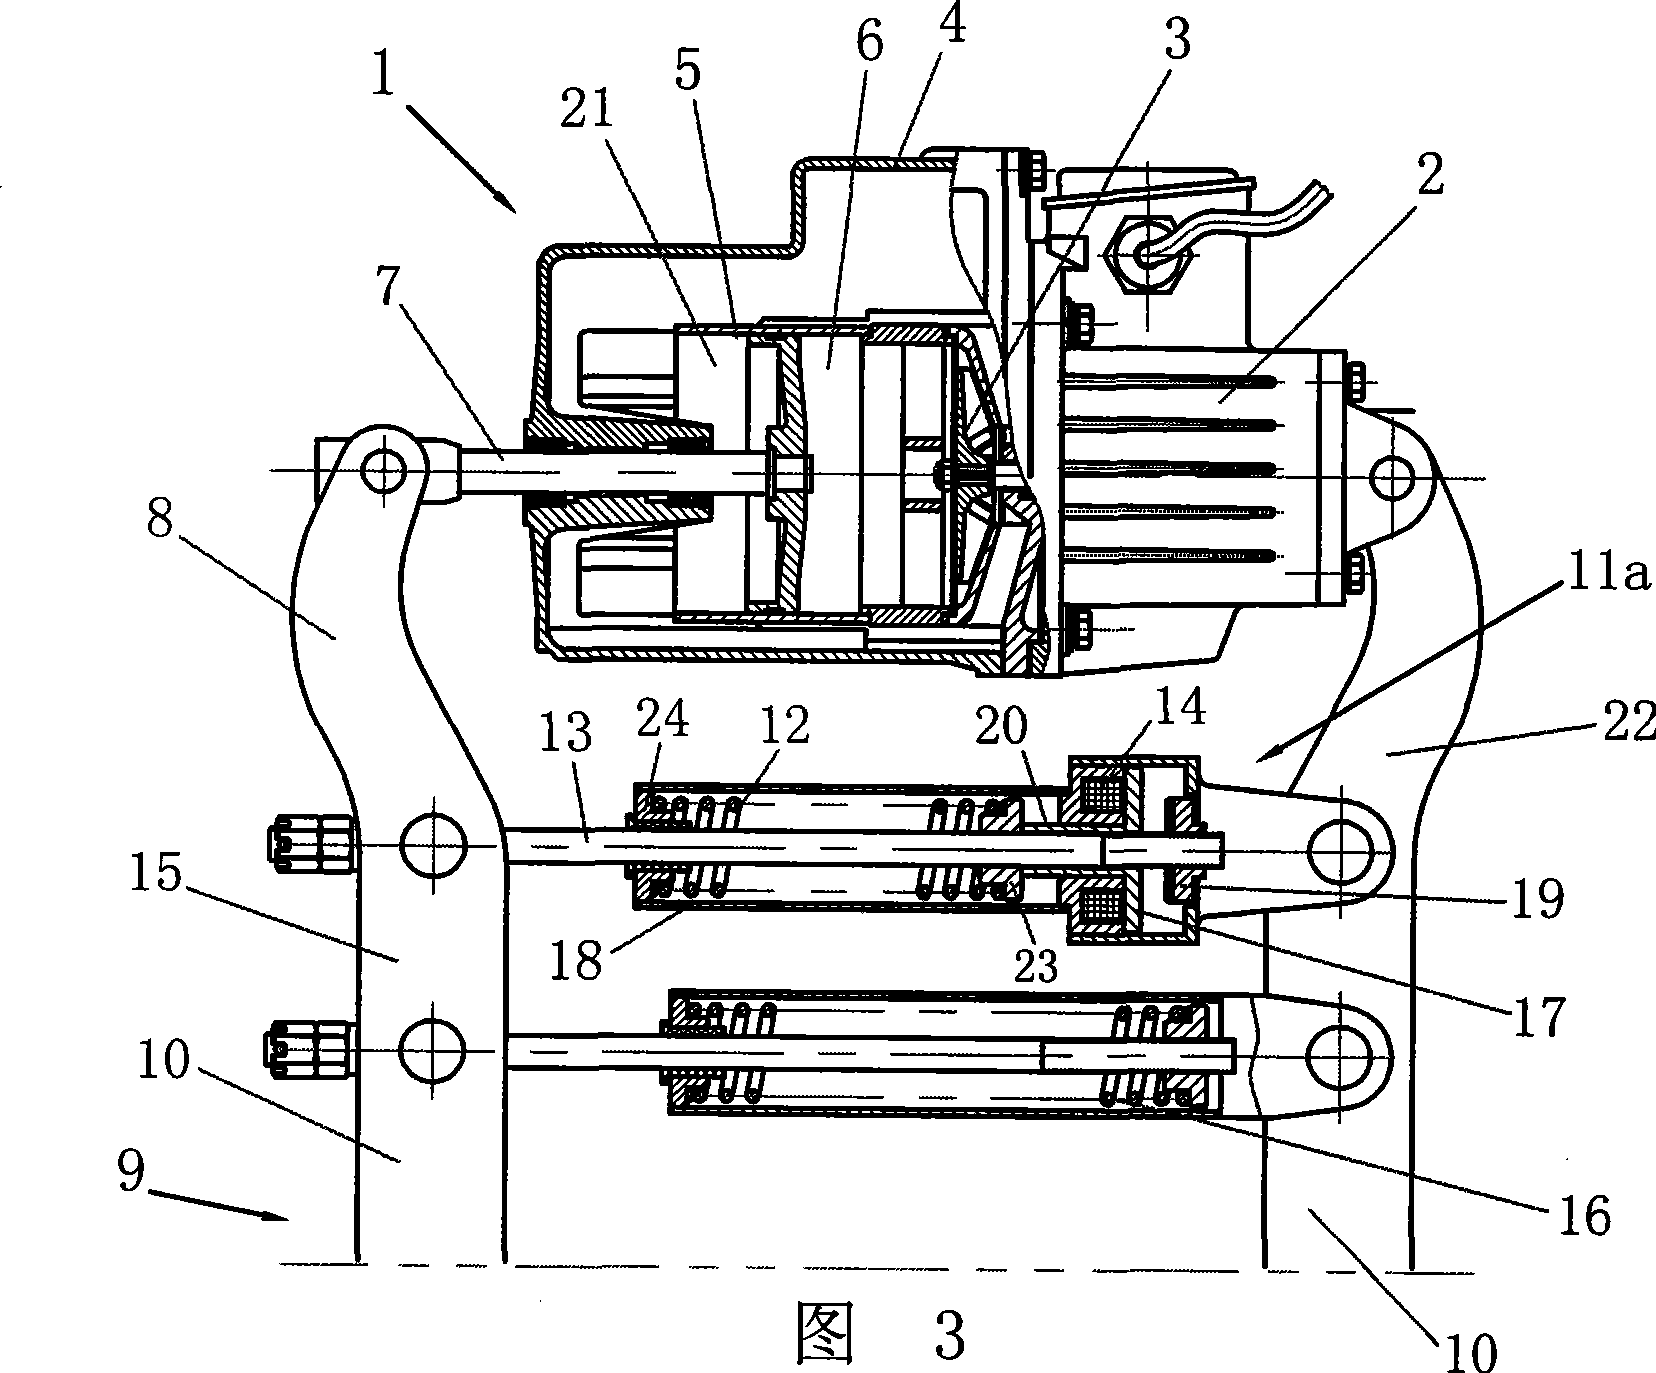 Stacked braking thrust unit of normally closed brake